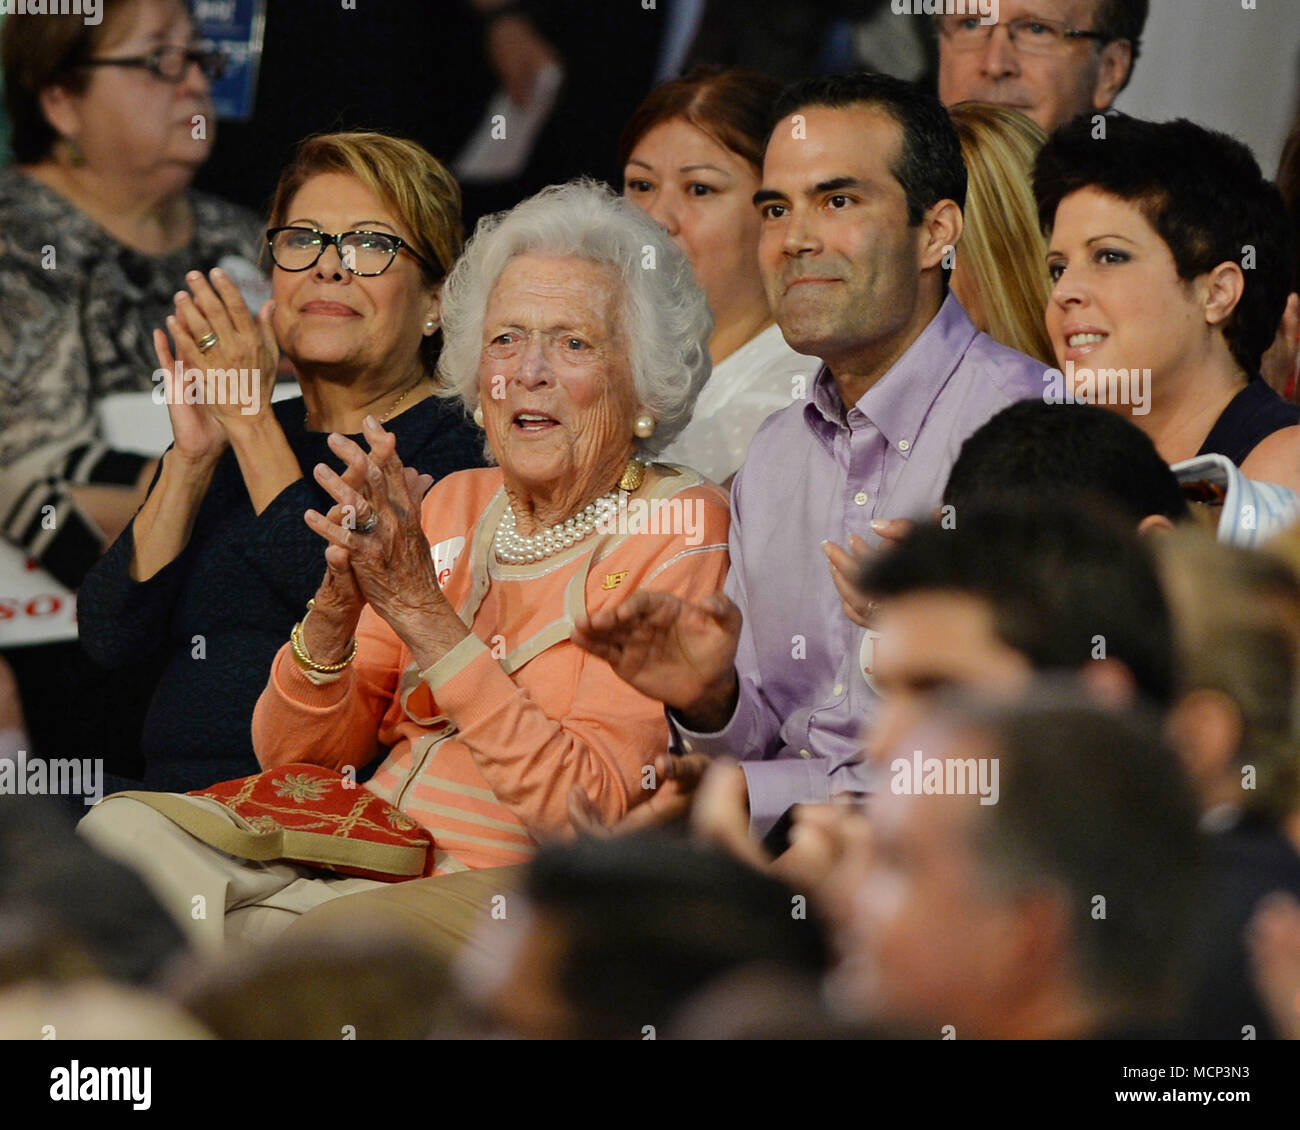 ***FILE PHOO*** BARBARA BUSH HAS PASSED AWAY (1925-2018) MIAMI, FL - JUNE 15: Columba Bush, Barbara Bush and George P. Bush as Former Florida Governor Jeb Bush announces his candidacy for the 2016 Republican Presidential nomination during a rally at Miami Dade College on June 15, 2015 in Miami, Florida. Credit: mpi04/MediaPunch Stock Photo